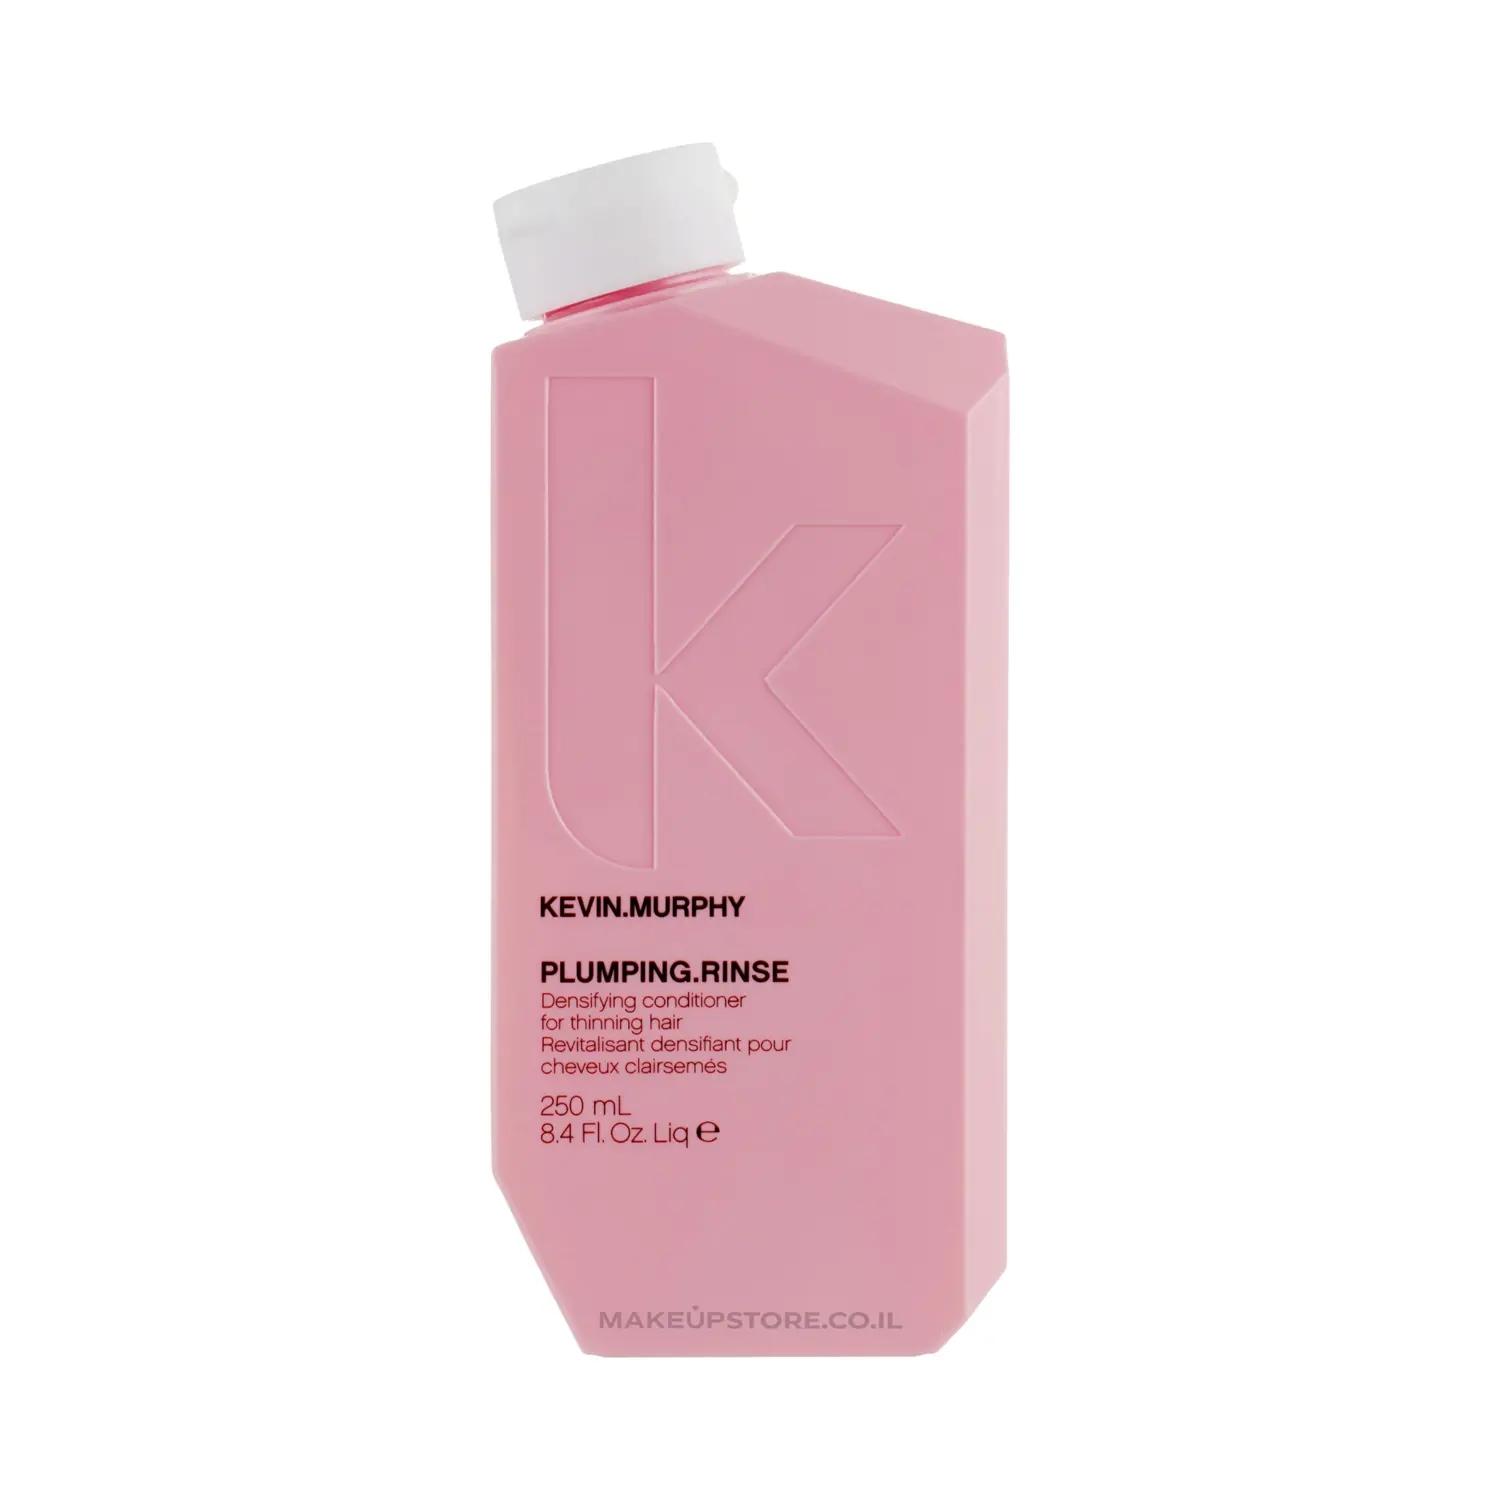 kevin murphy plumping rinse densifying conditioner (250ml)